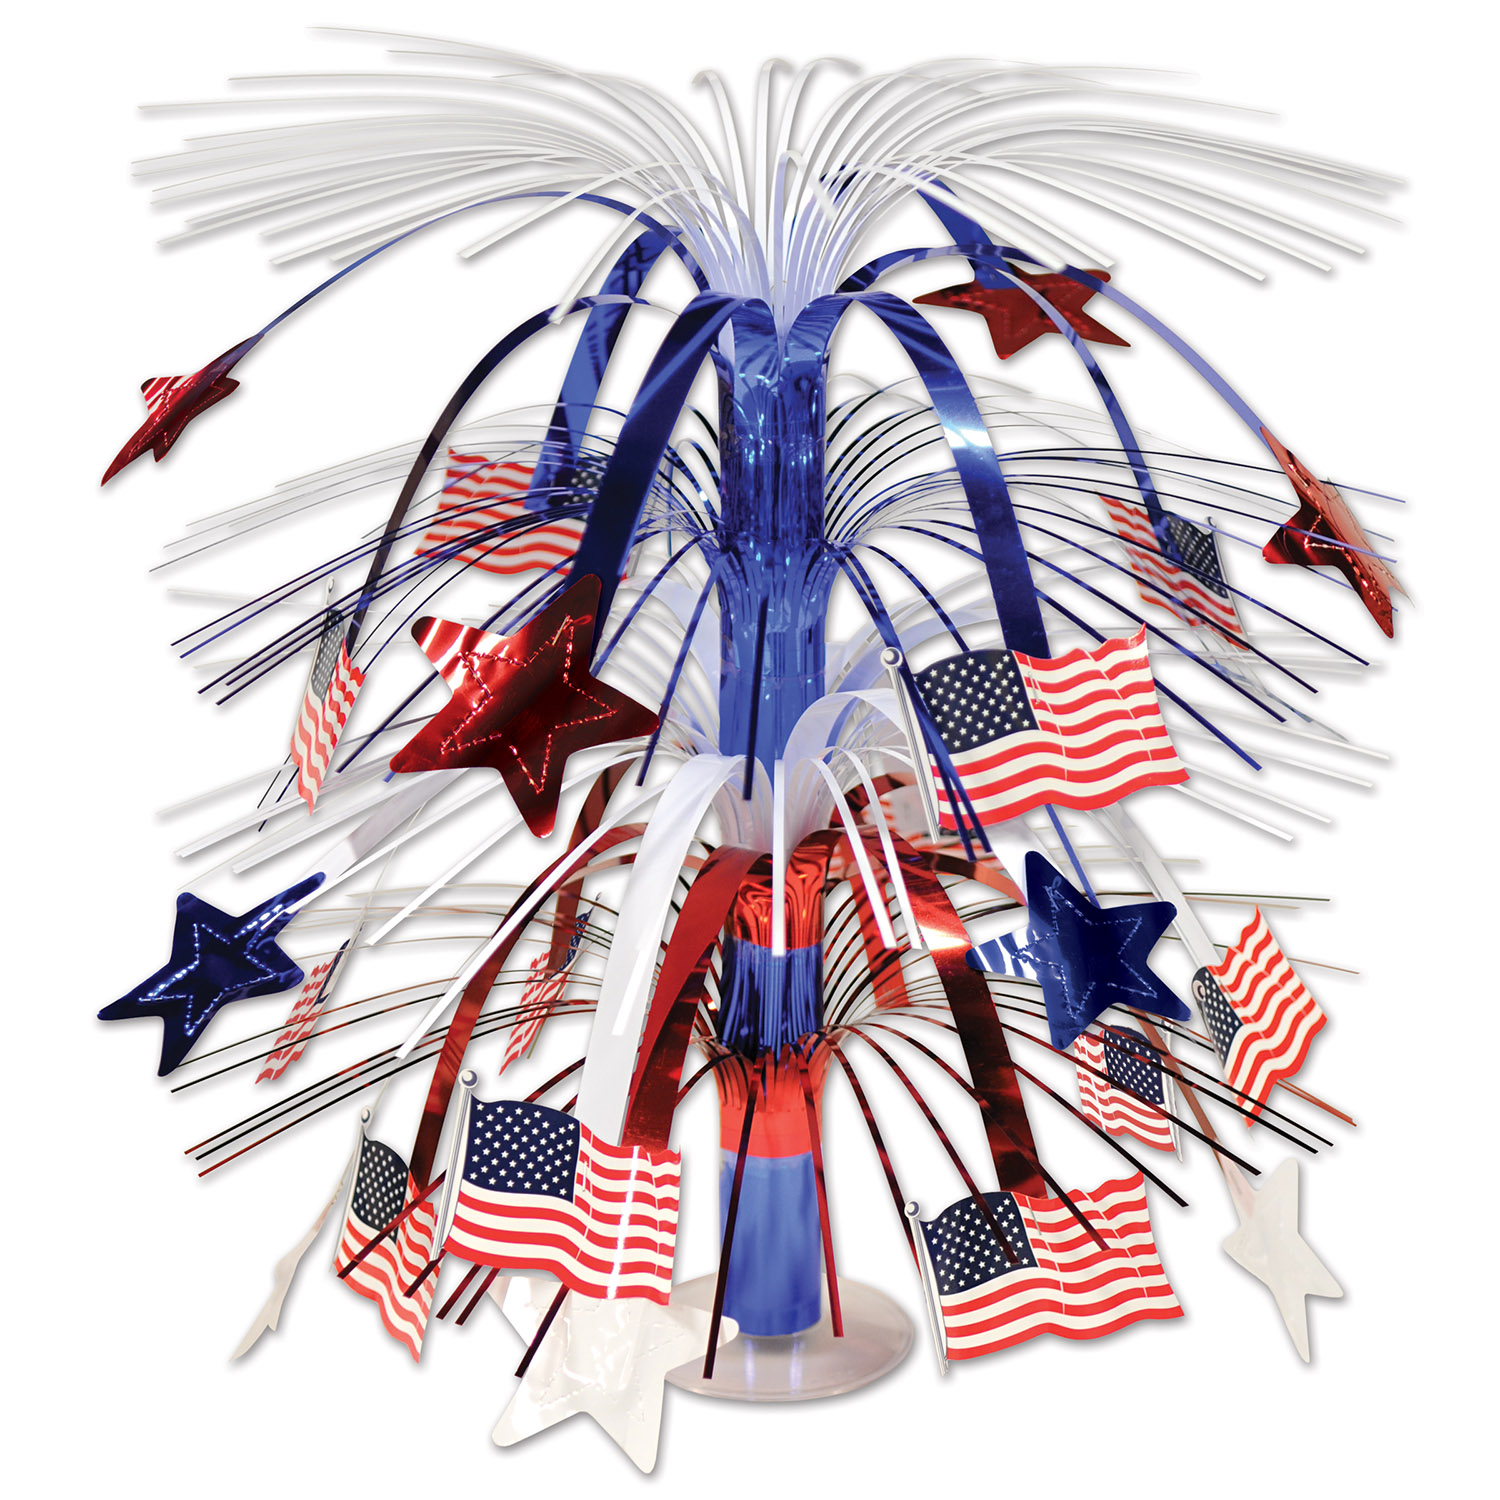 Patriotic centerpiece with red white and blue stars with american flags hanging off of the metallic centerpiece